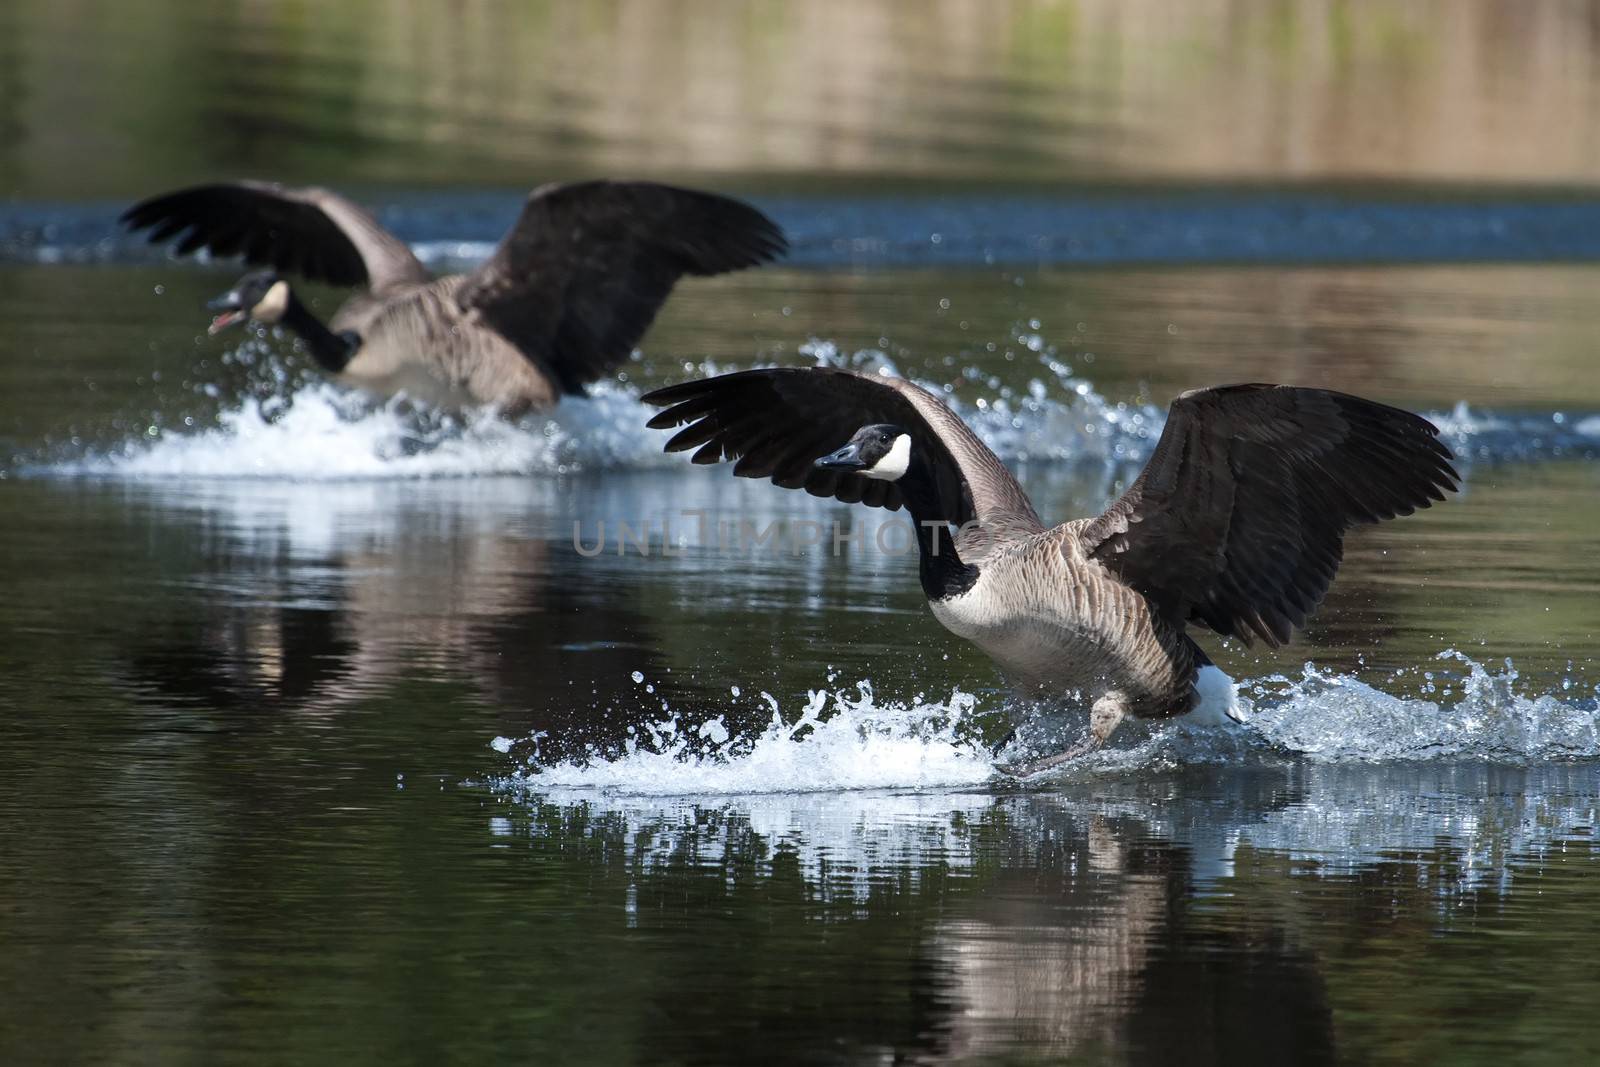 Canadian geese landing in the water on a pond